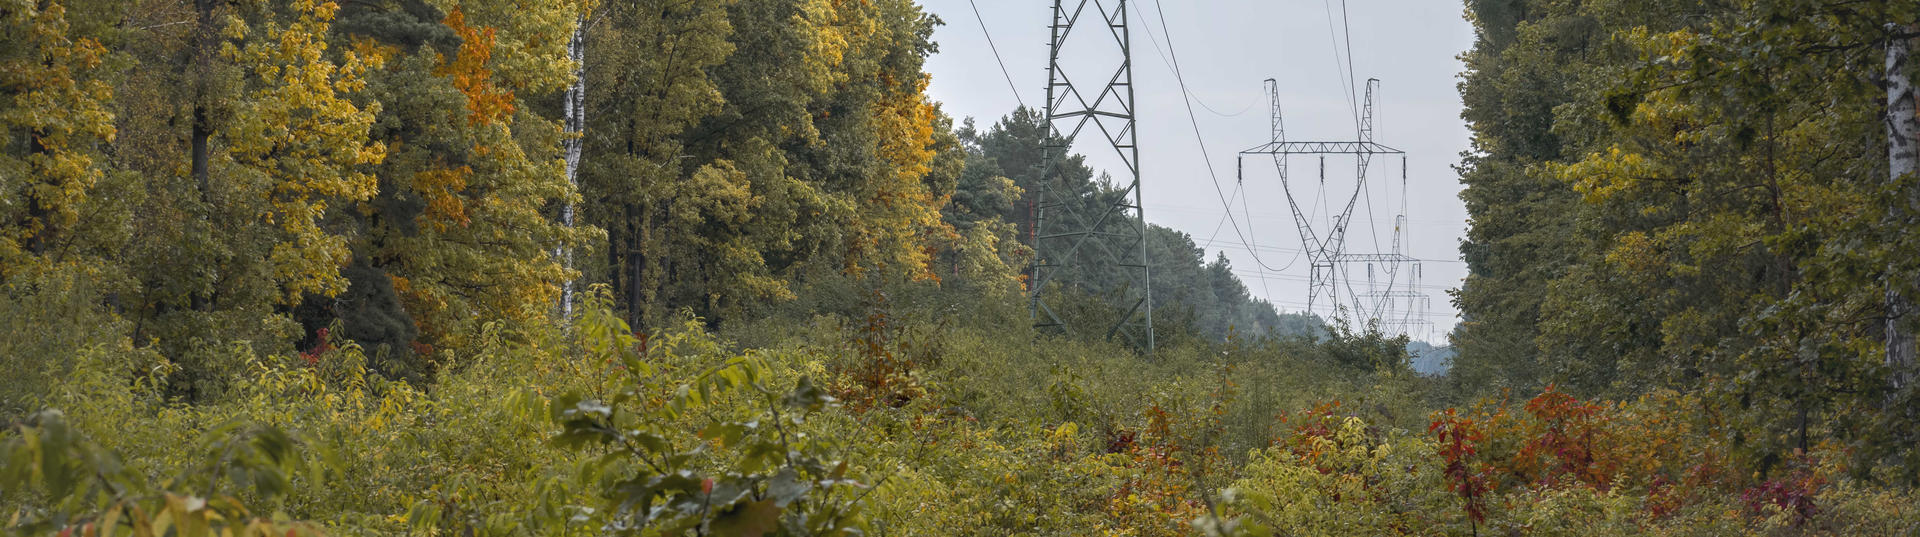 Transmission line clearance in forested area